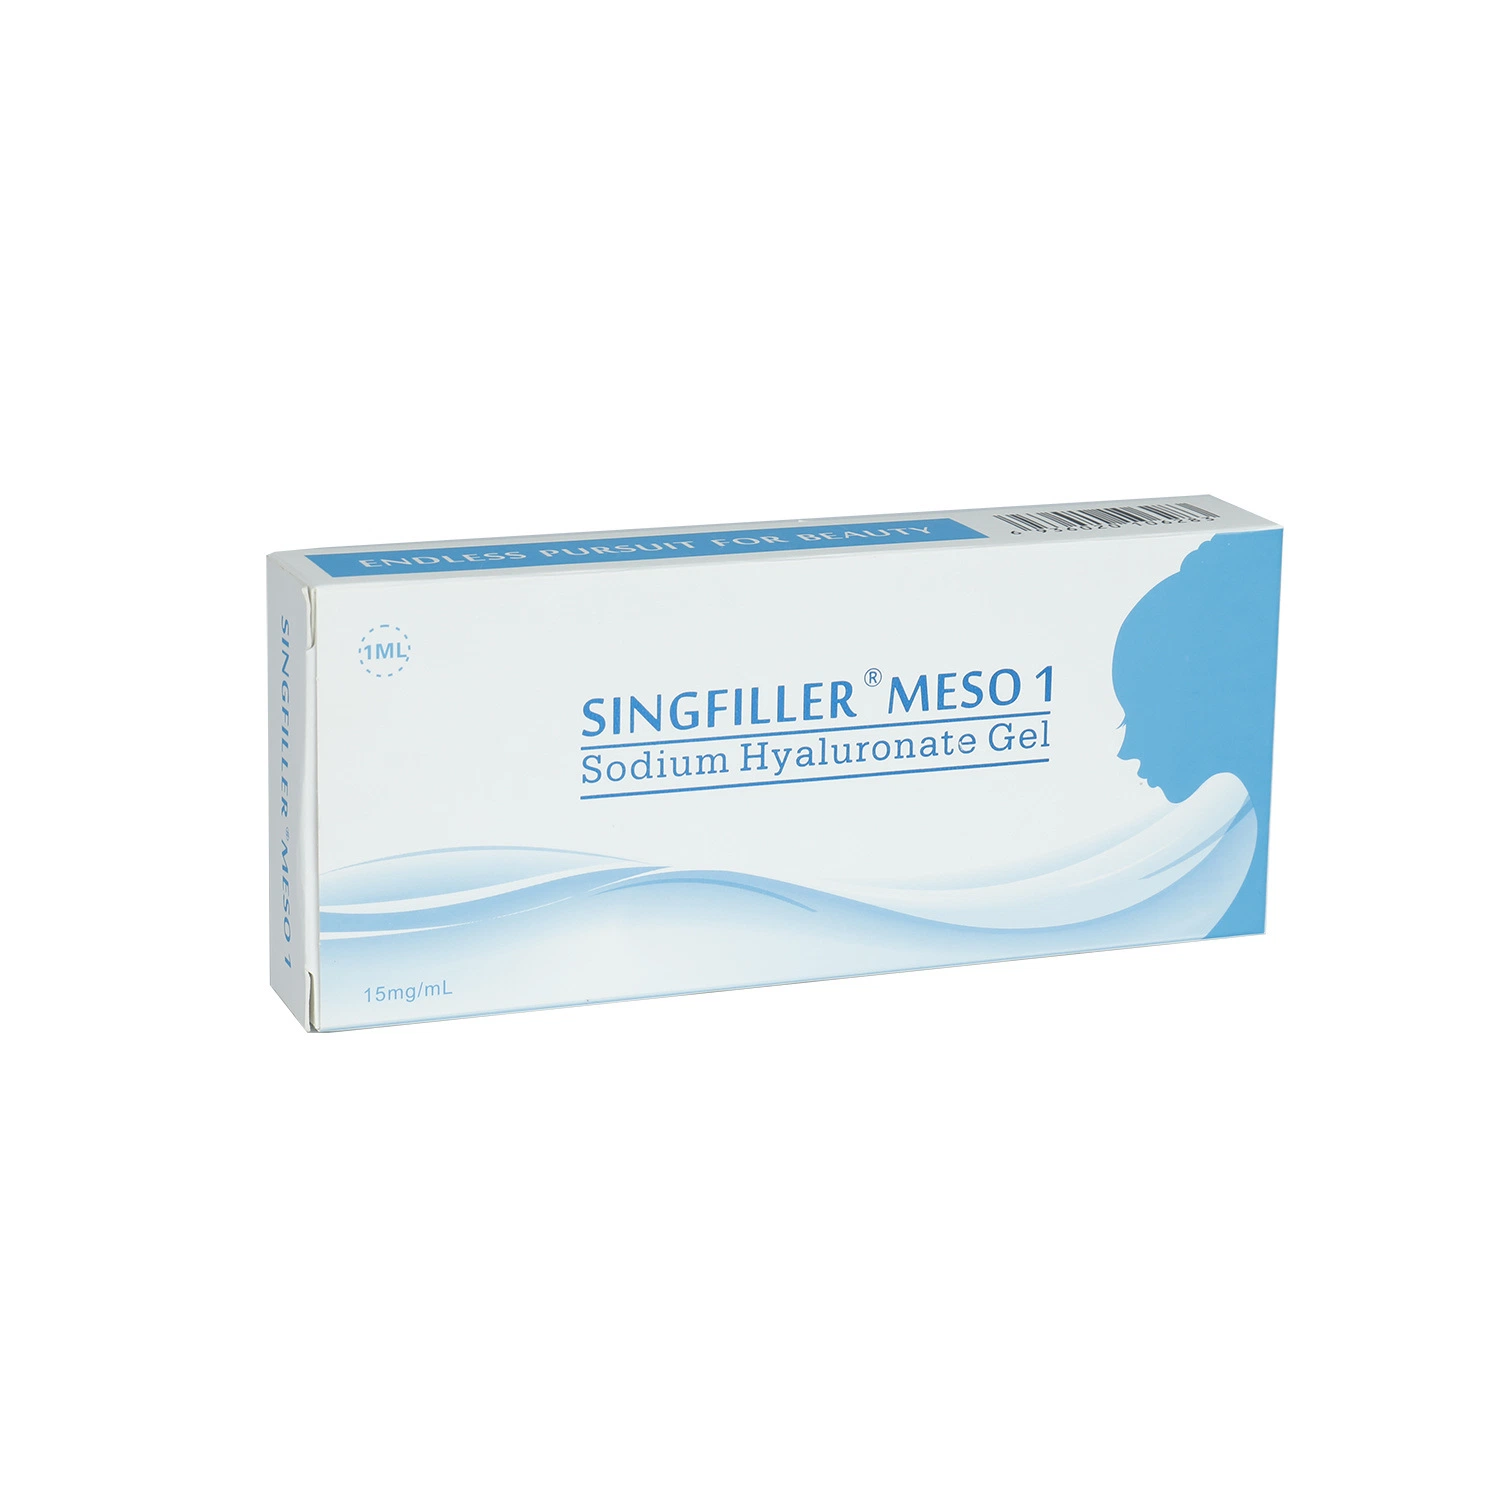 2*30g 1/2" Needles Pure Slimming Anti-Aging Whitening Meso Hyaluronic Acid Injection Skin Booster